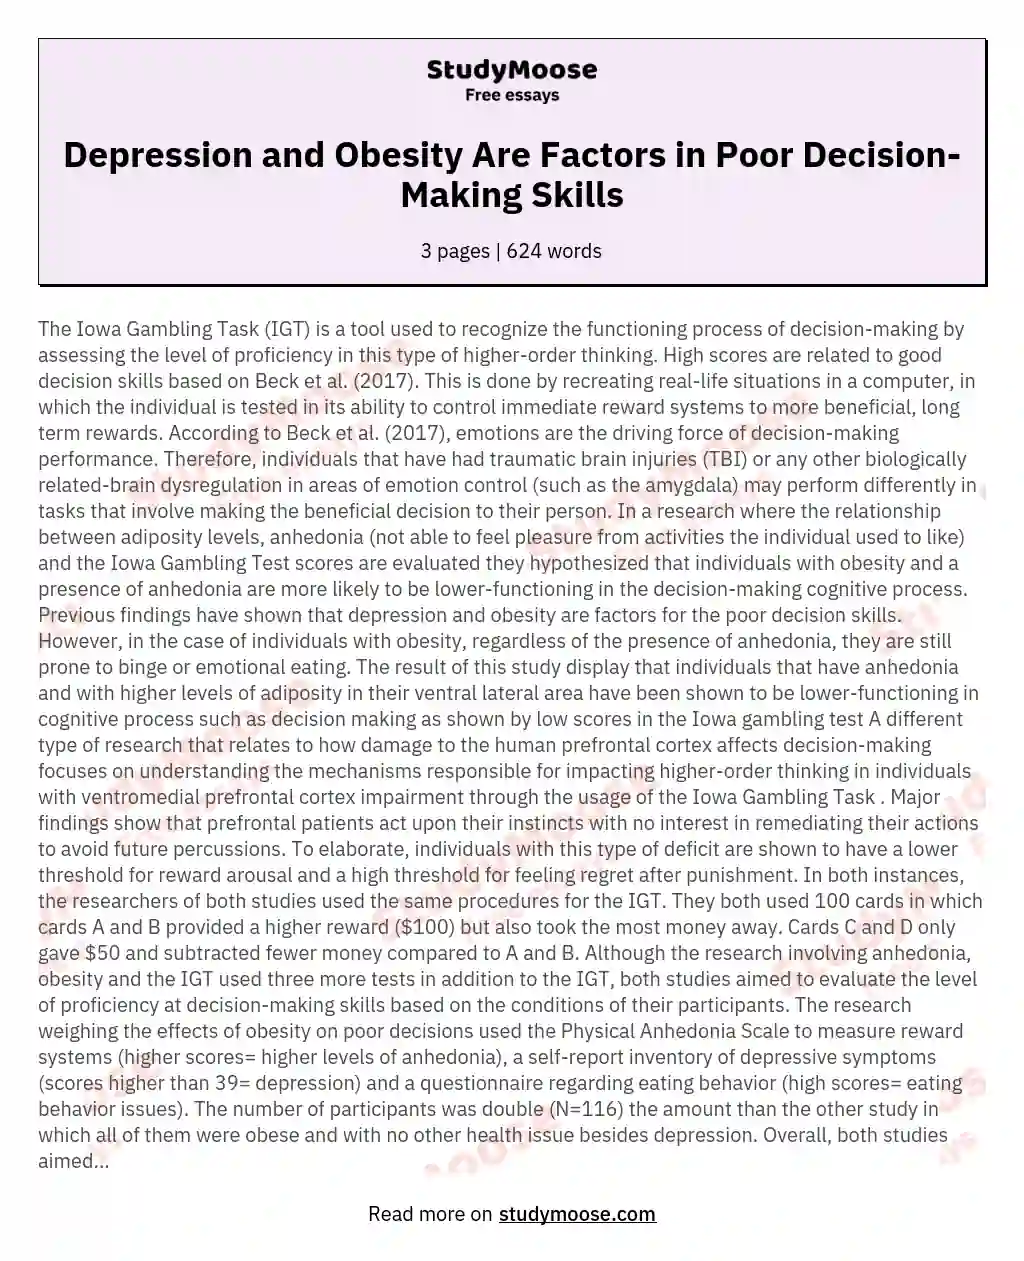 Depression and Obesity Are Factors in Poor Decision-Making Skills essay